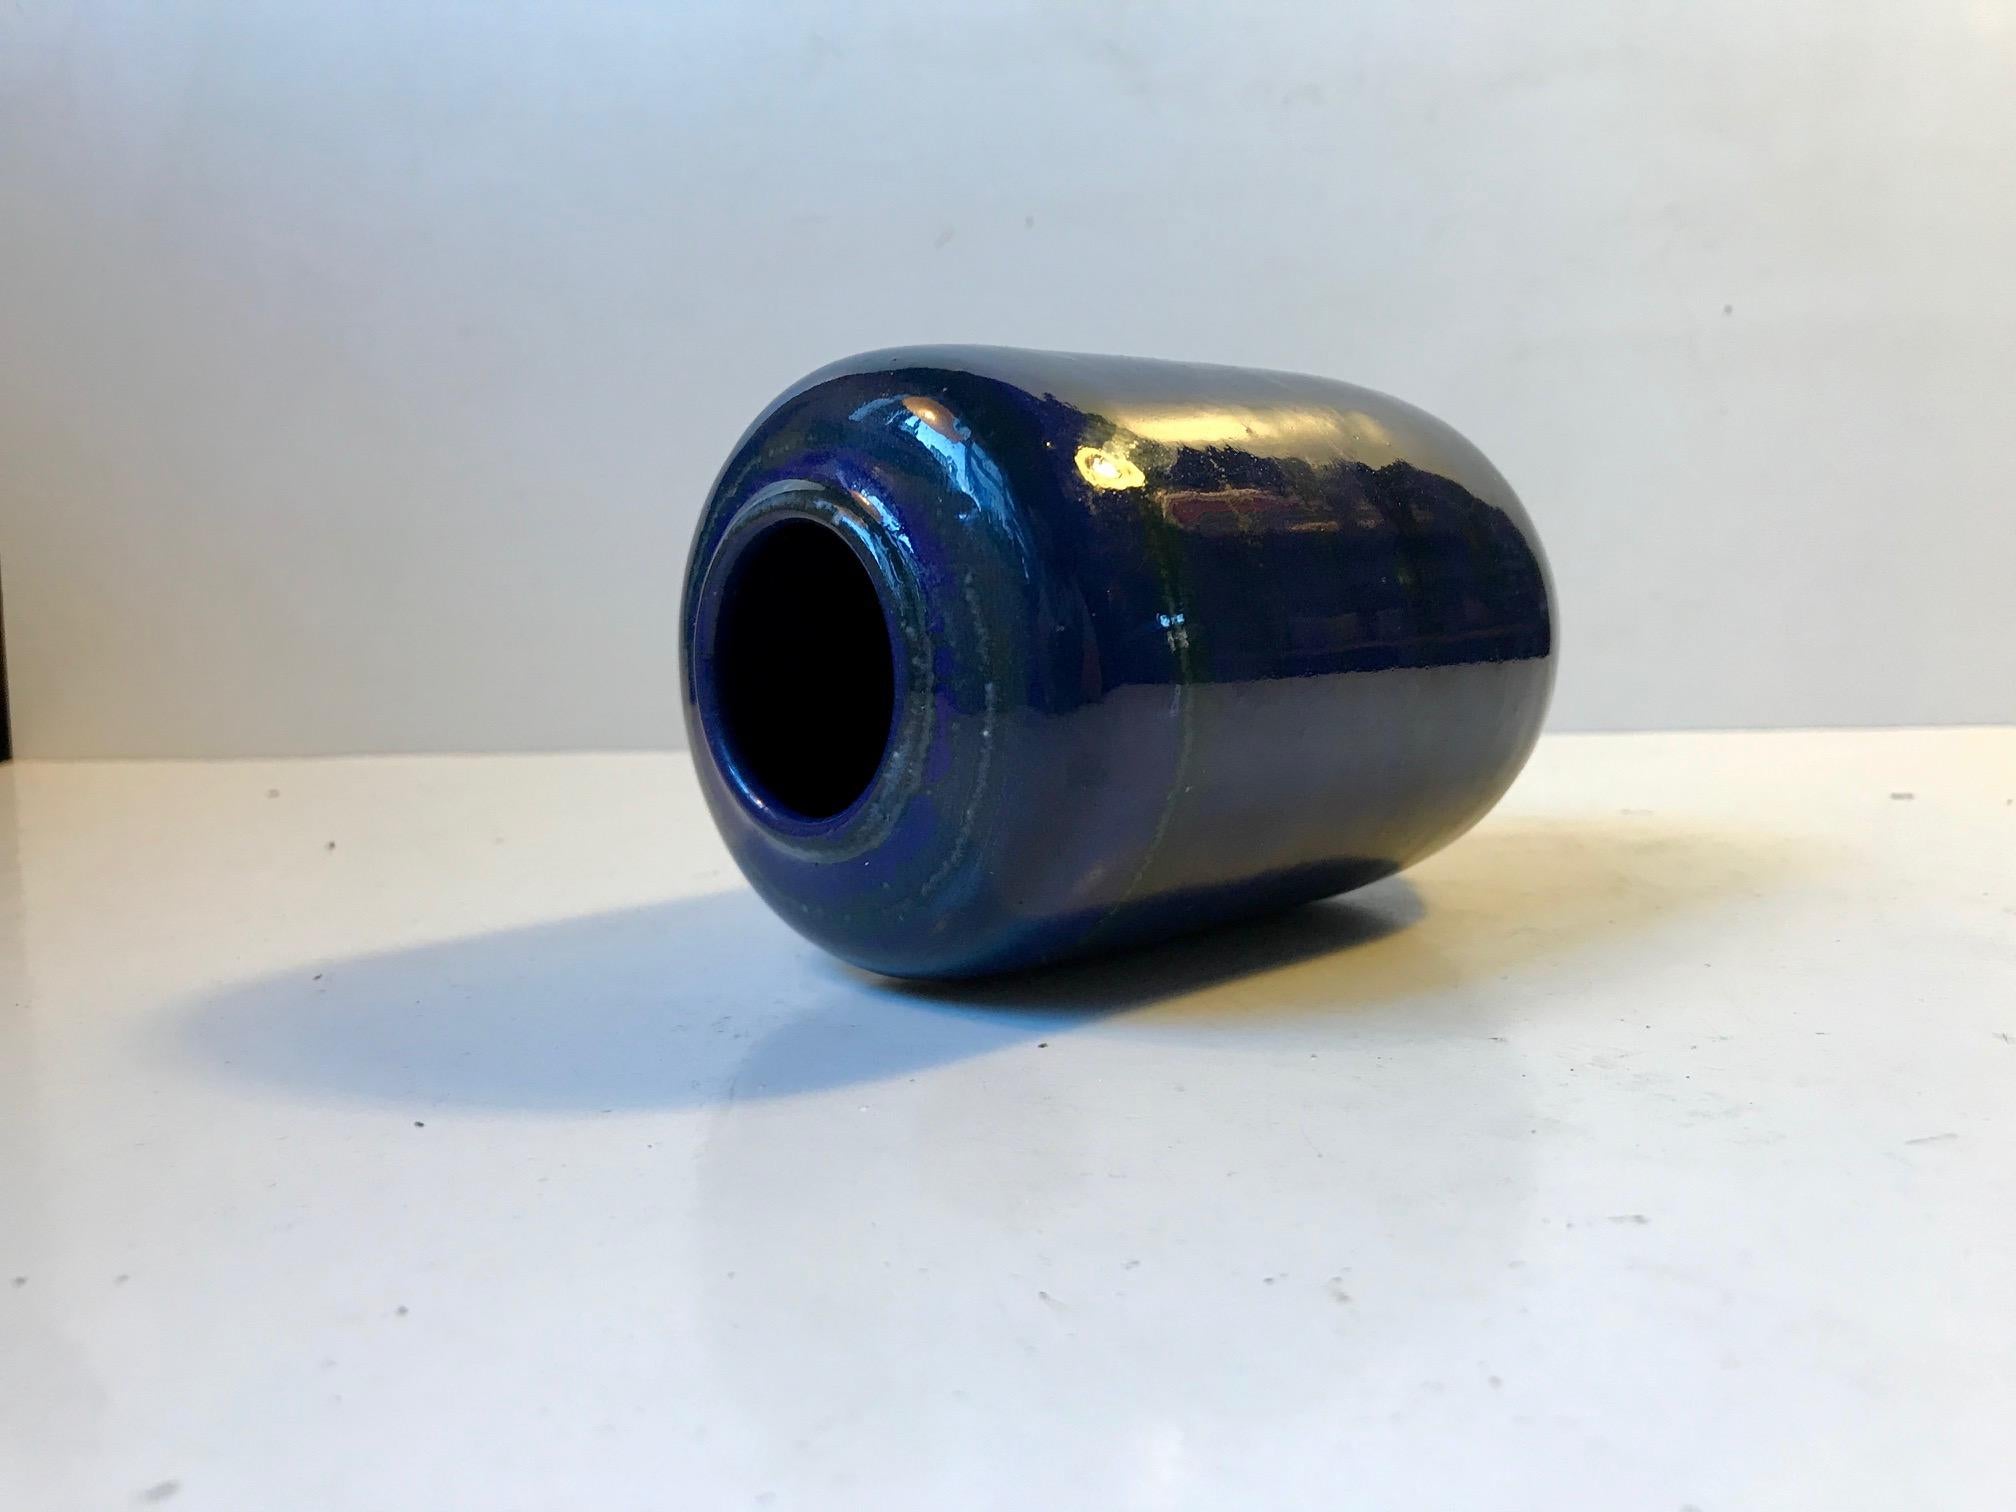 Organically shaped ceramic vase in blue glaze with green stripes. Designed by the German ceramist Gerhard Meisel and made in his studio in Stahnsdorf during the 1970s. Signed by hand to the base.